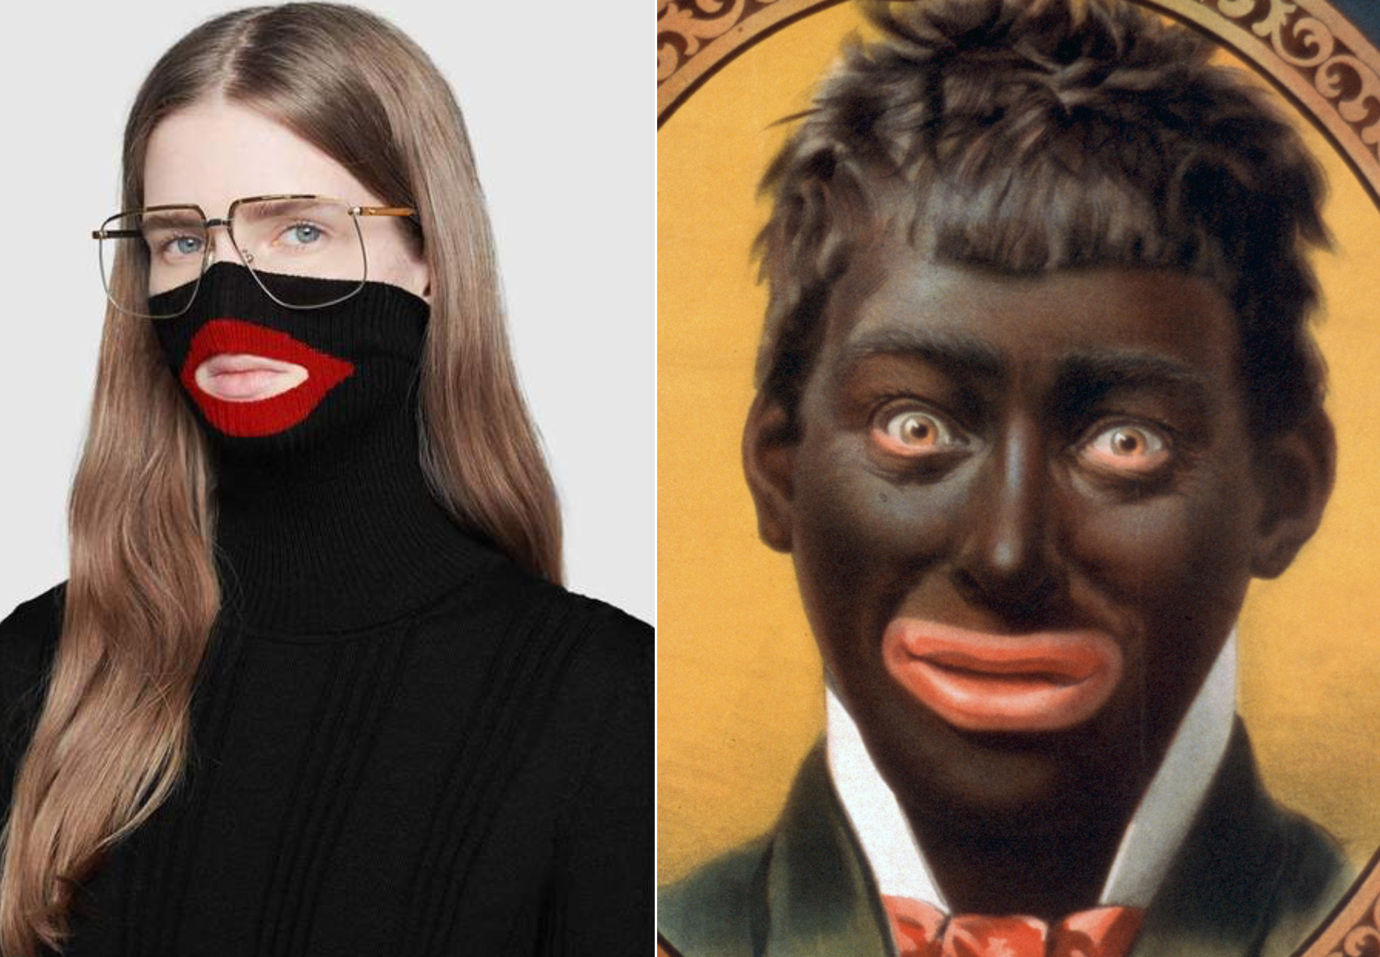 Two images shown side by side that are examples of blackface now and then. On the left a young white model wearing a black polo neck pulled up over her chin and nose, her lips are visible through a gap in the fabric which is lined by a red lip print. On the right is a picture of a white man in blackface from a poster advertising a minstrel show in late 1800s - early 1900s.